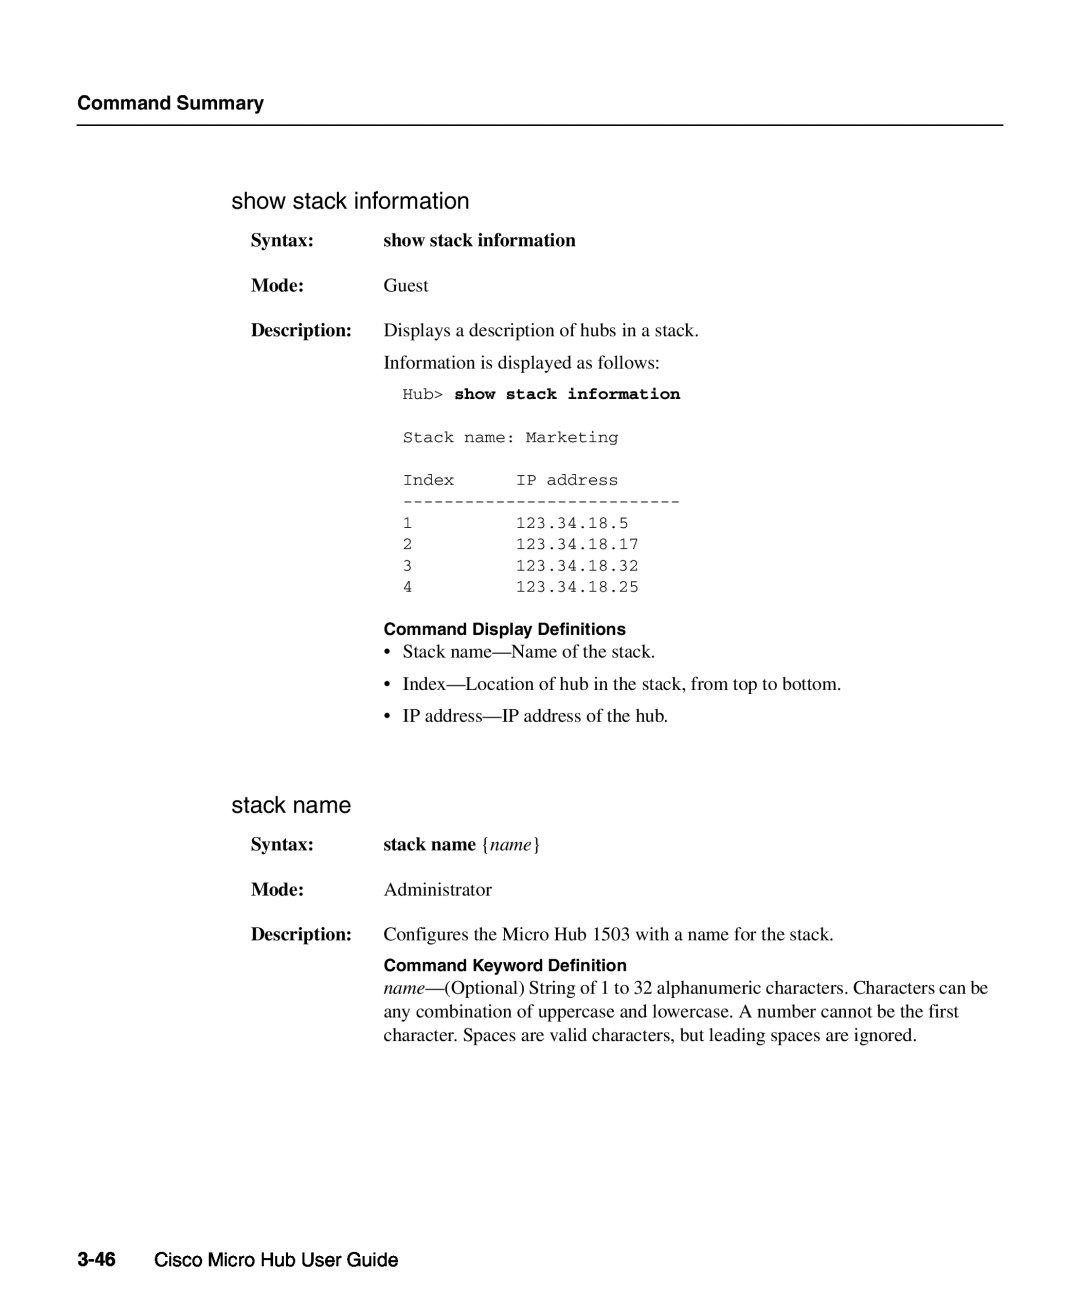 Cisco Systems 1503 manual show stack information, stack name, Command Summary, Cisco Micro Hub User Guide 